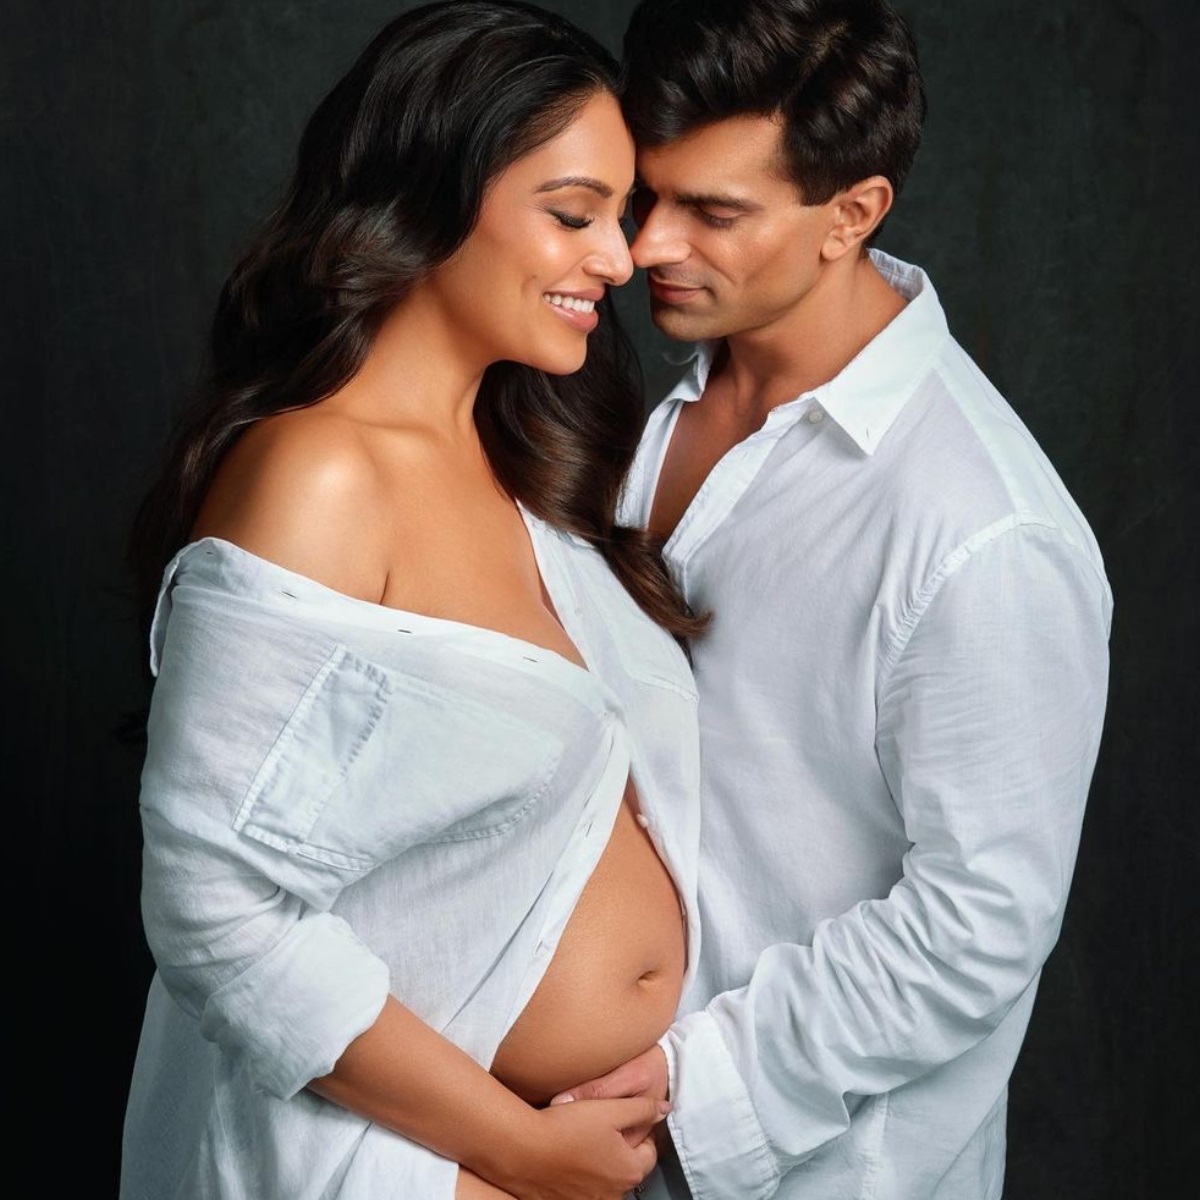 Bipasha Basu Boliwood Actor Porn Vedeo - Bipasha Basu and Karan Singh Grover announce pregnancy: We who once were  two will now become three | PINKVILLA